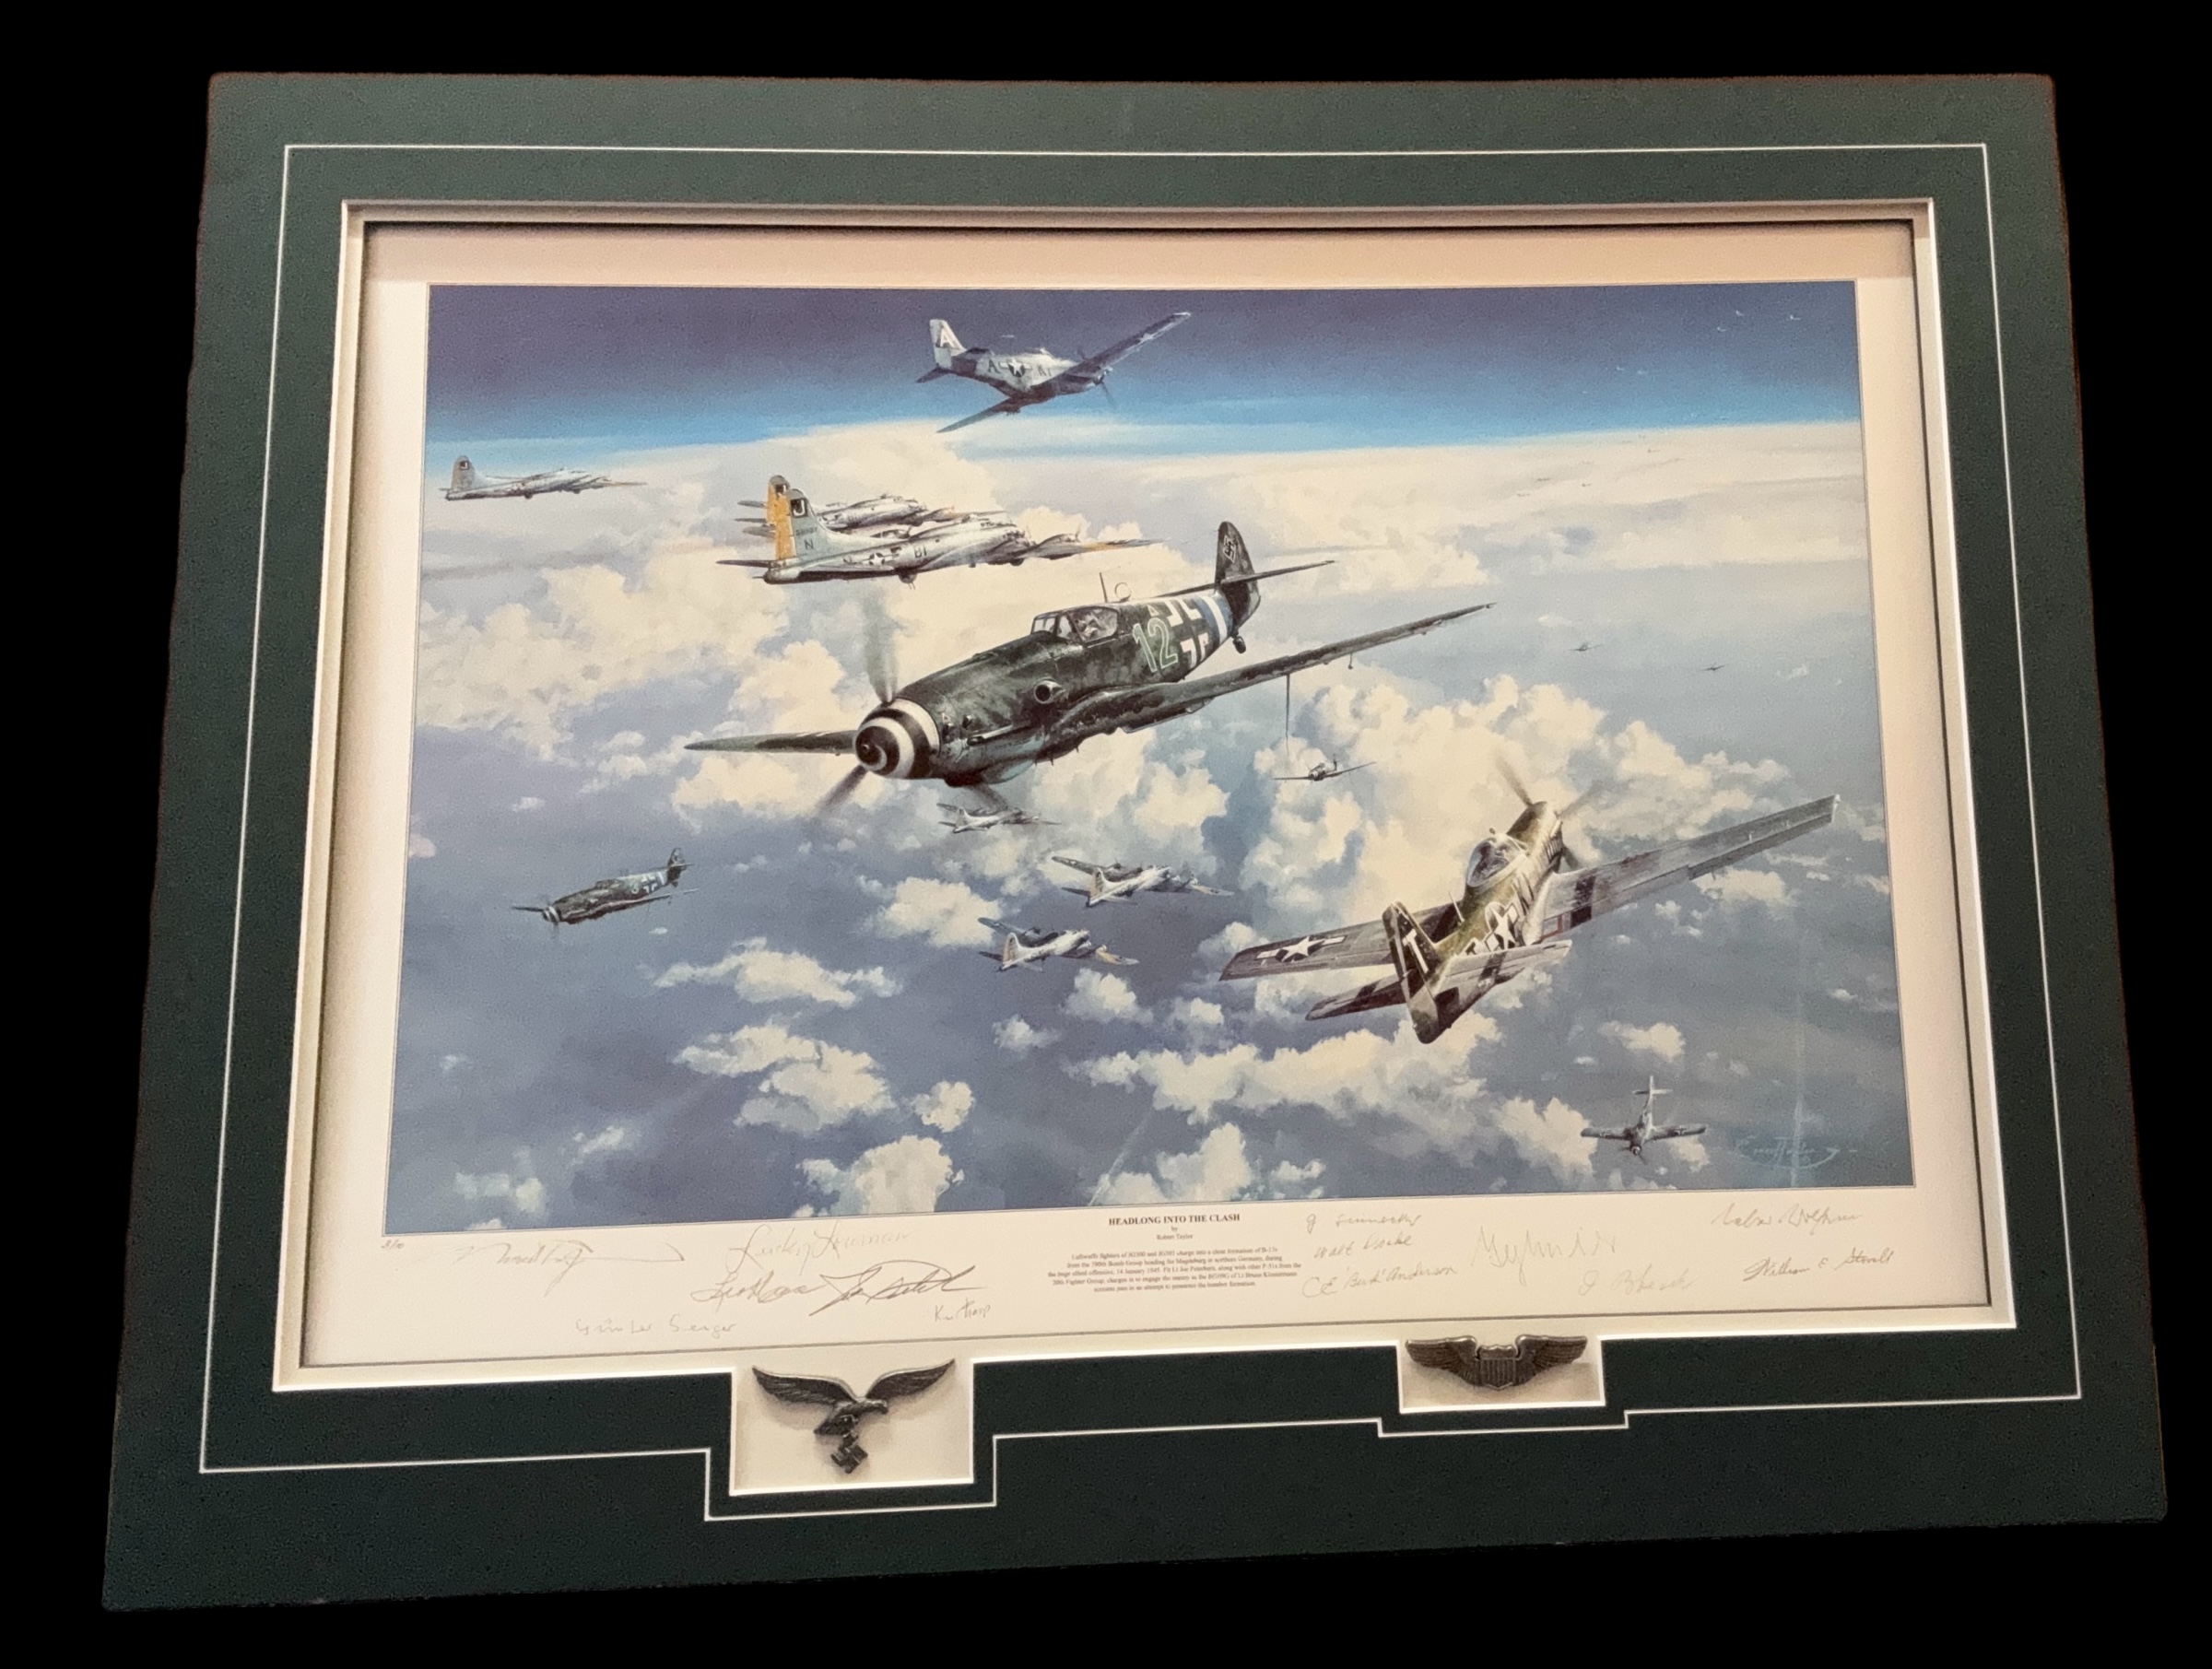 WW2 Print titled Headlong Into the Clash by Robert Taylor Tribute edition Limited 3/10. Multi signed